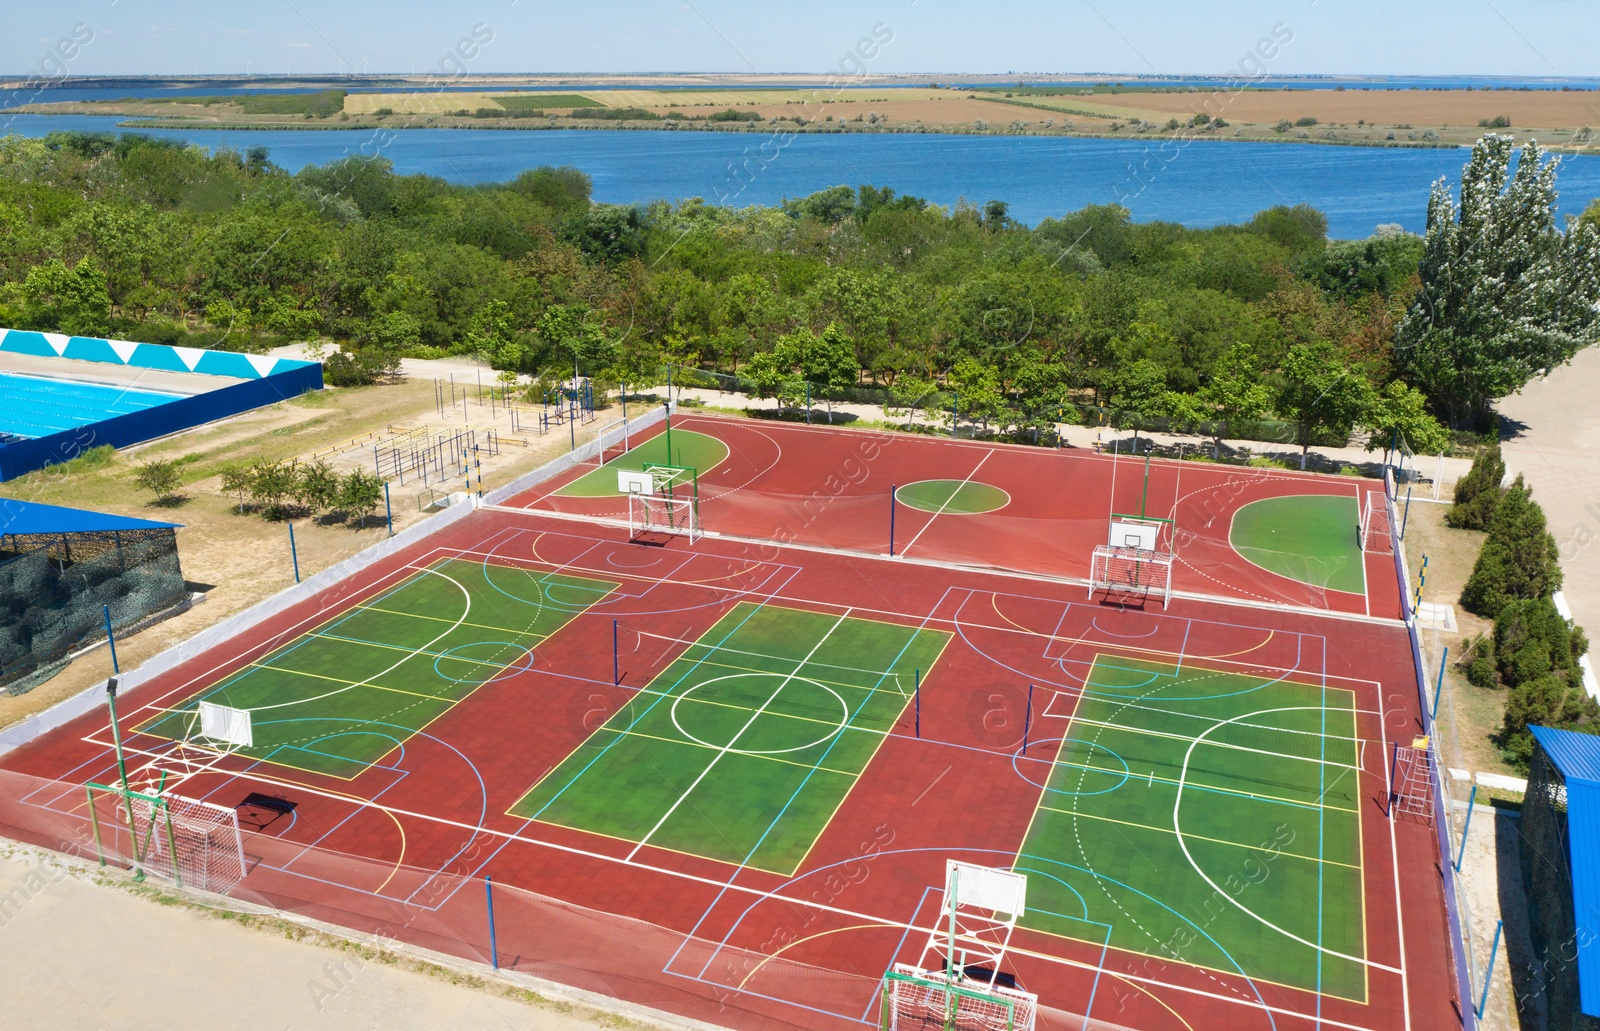 Image of Outdoor sports complex near bay on sunny day, aerial view